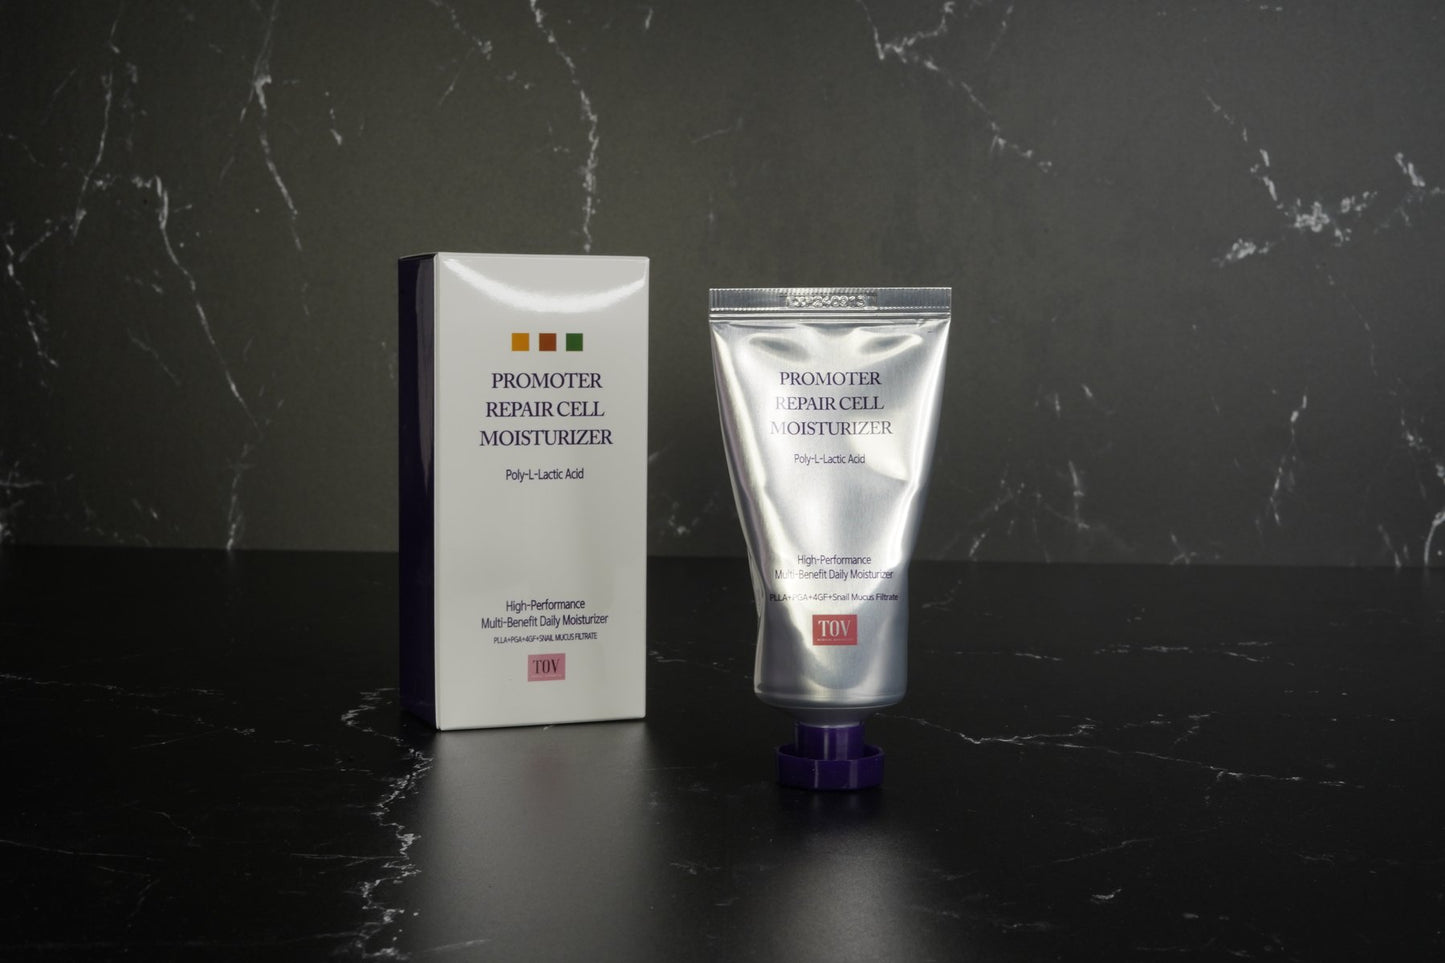 HOP+ Promoter Repair Cell Moisturizer (formerly Sculplla)